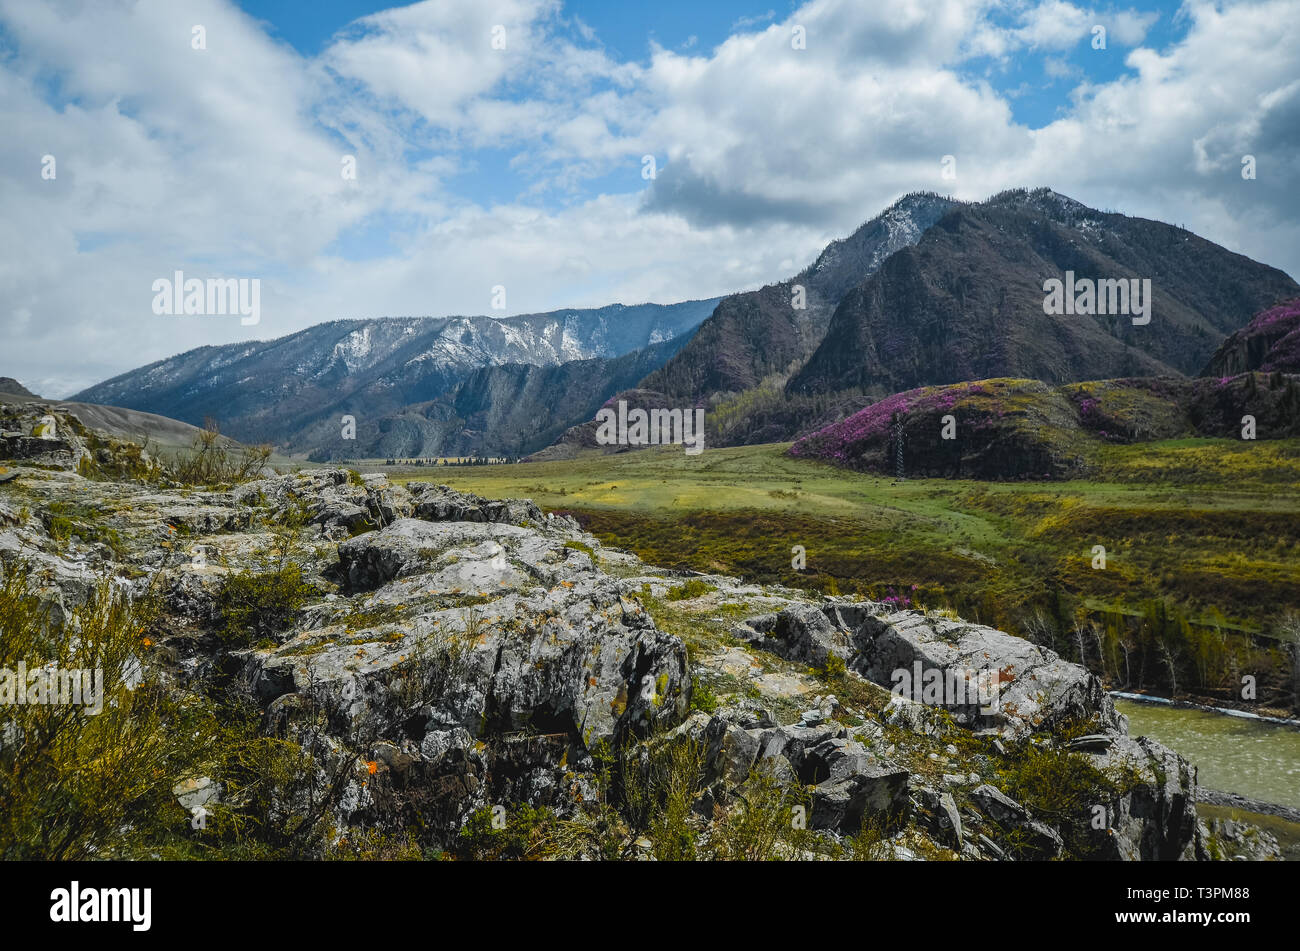 Mountain landscapes of the Chui tract, Altai. Valley. Spring bloom in the mountains of pink flowers Stock Photo